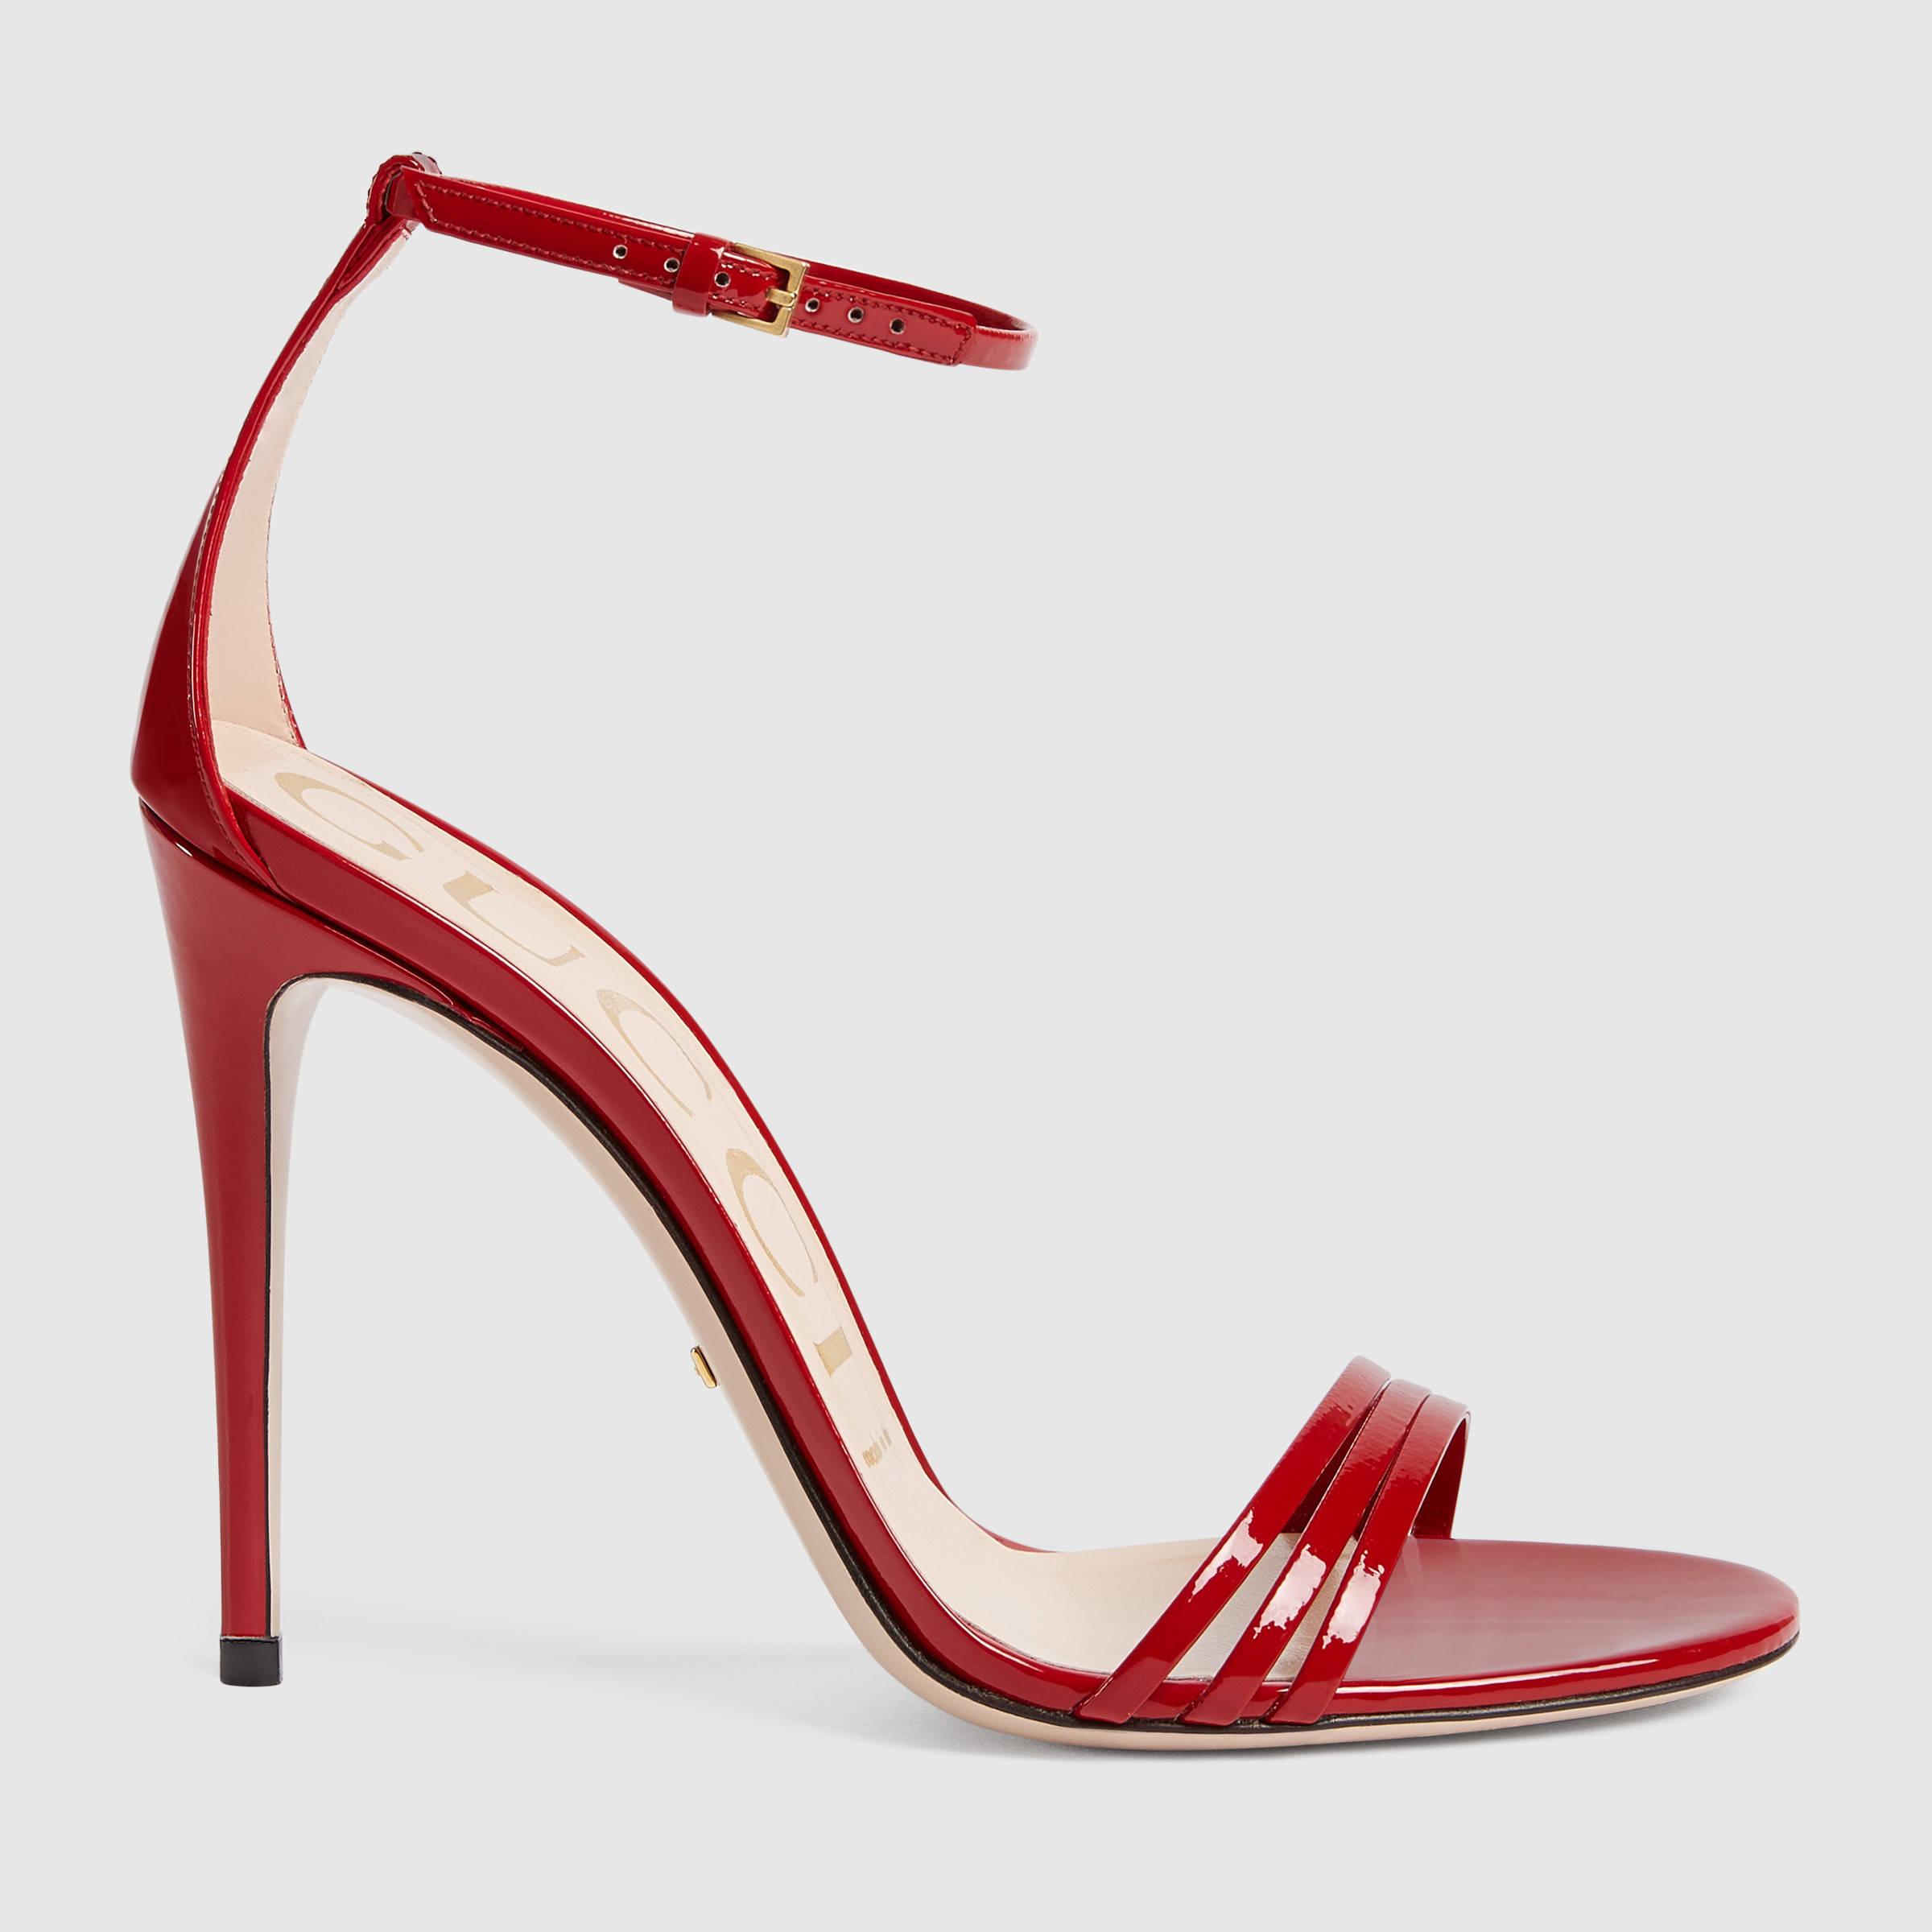 Gucci Patent Leather Sandal in Red | Lyst